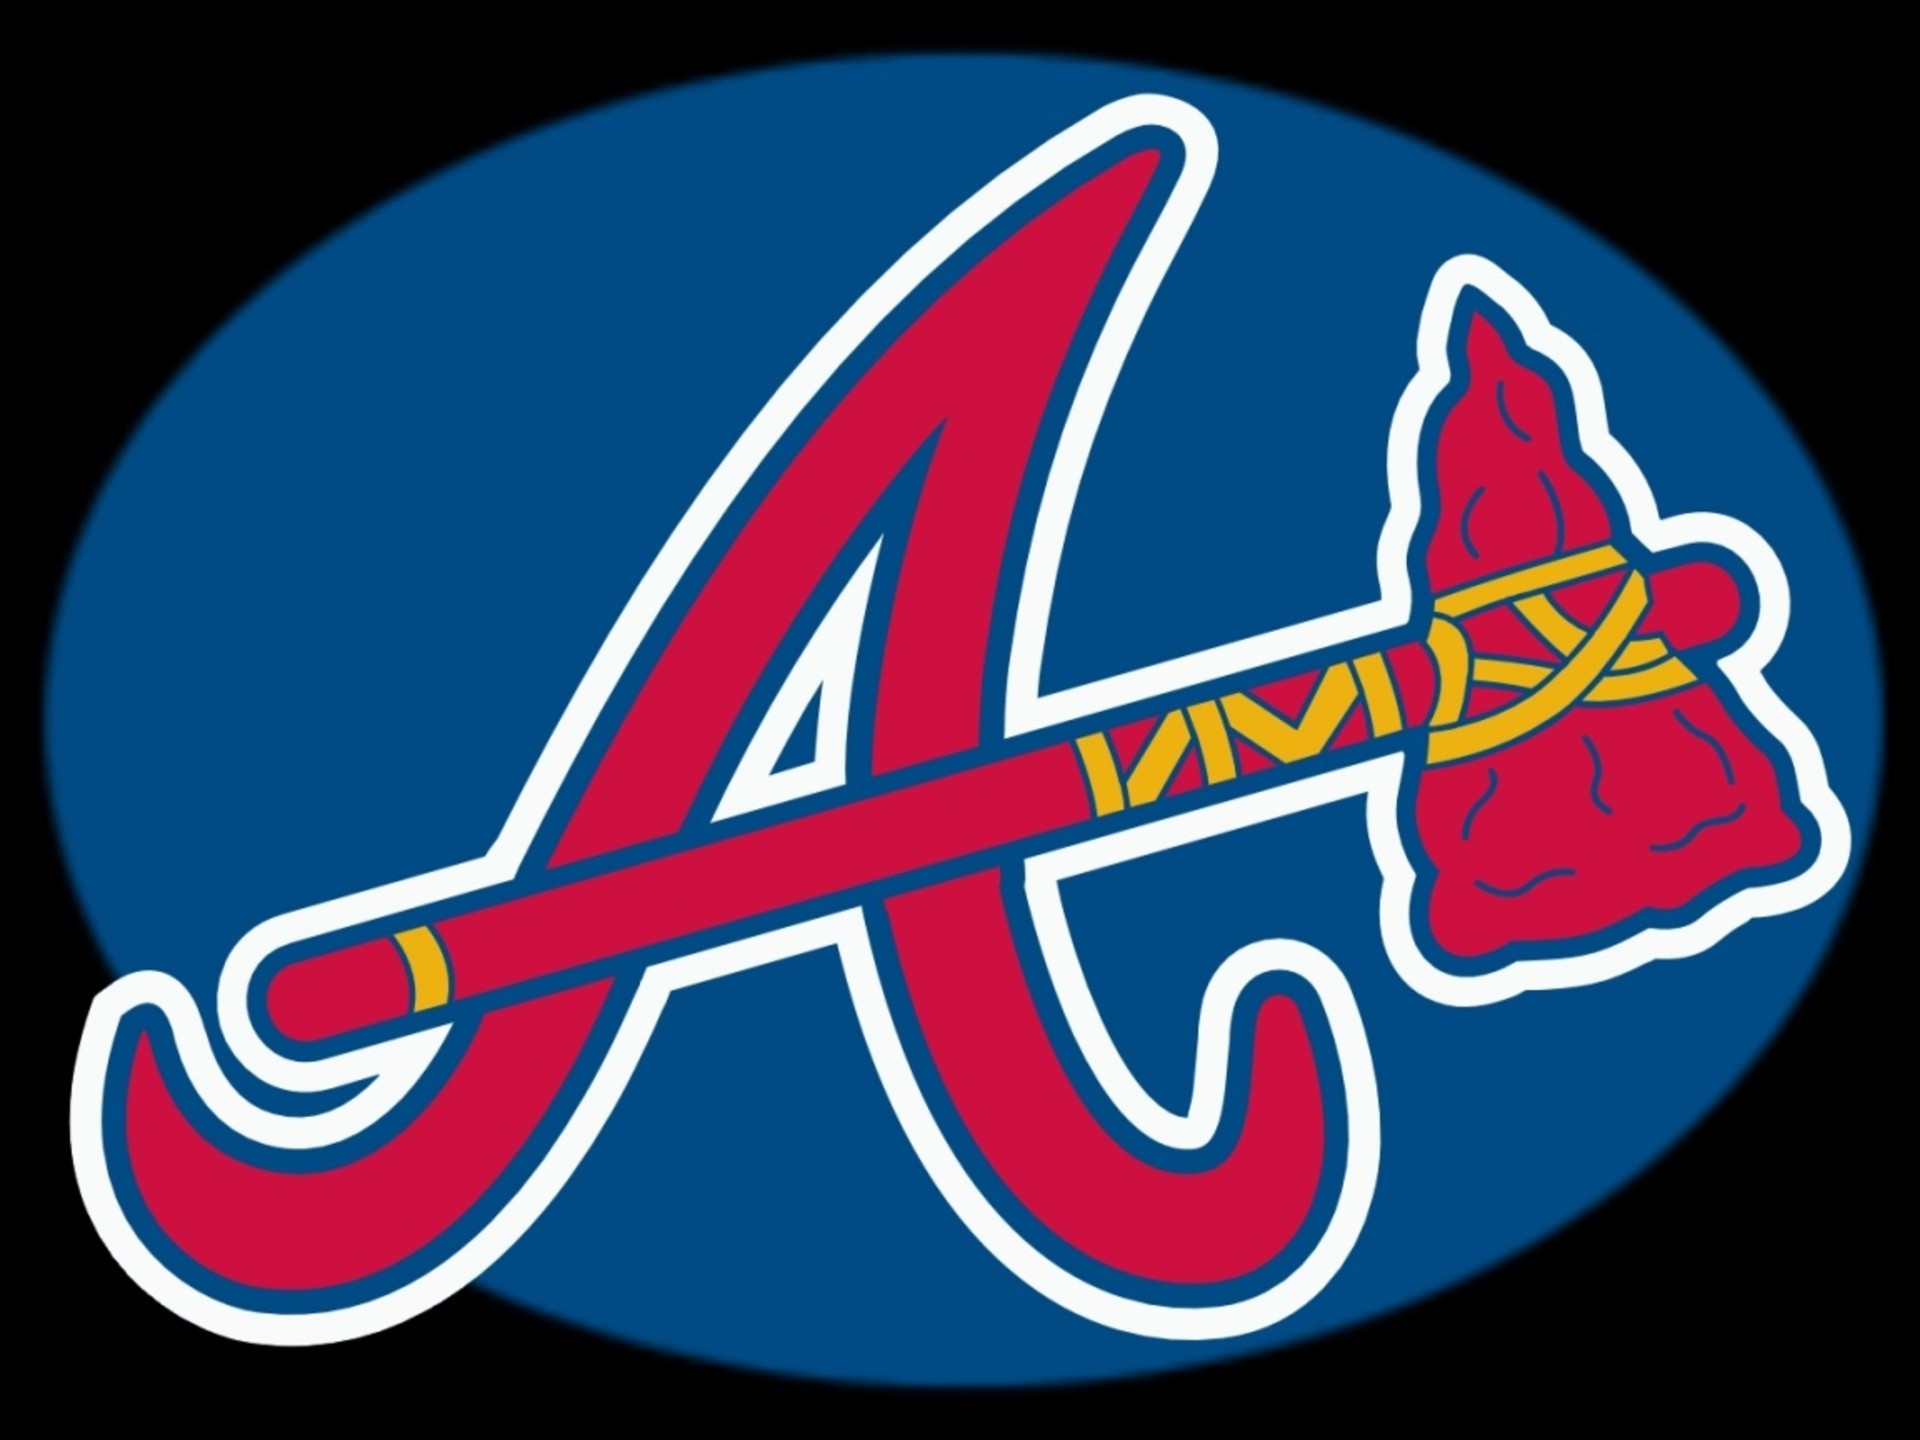 1920x1440 Cool Collections ofAtlanta Braves Wallpapers HD For Desktop, Laptop and  Mobiles. Here You Can Download More than 5 Million Photography collections  Uploaded ...